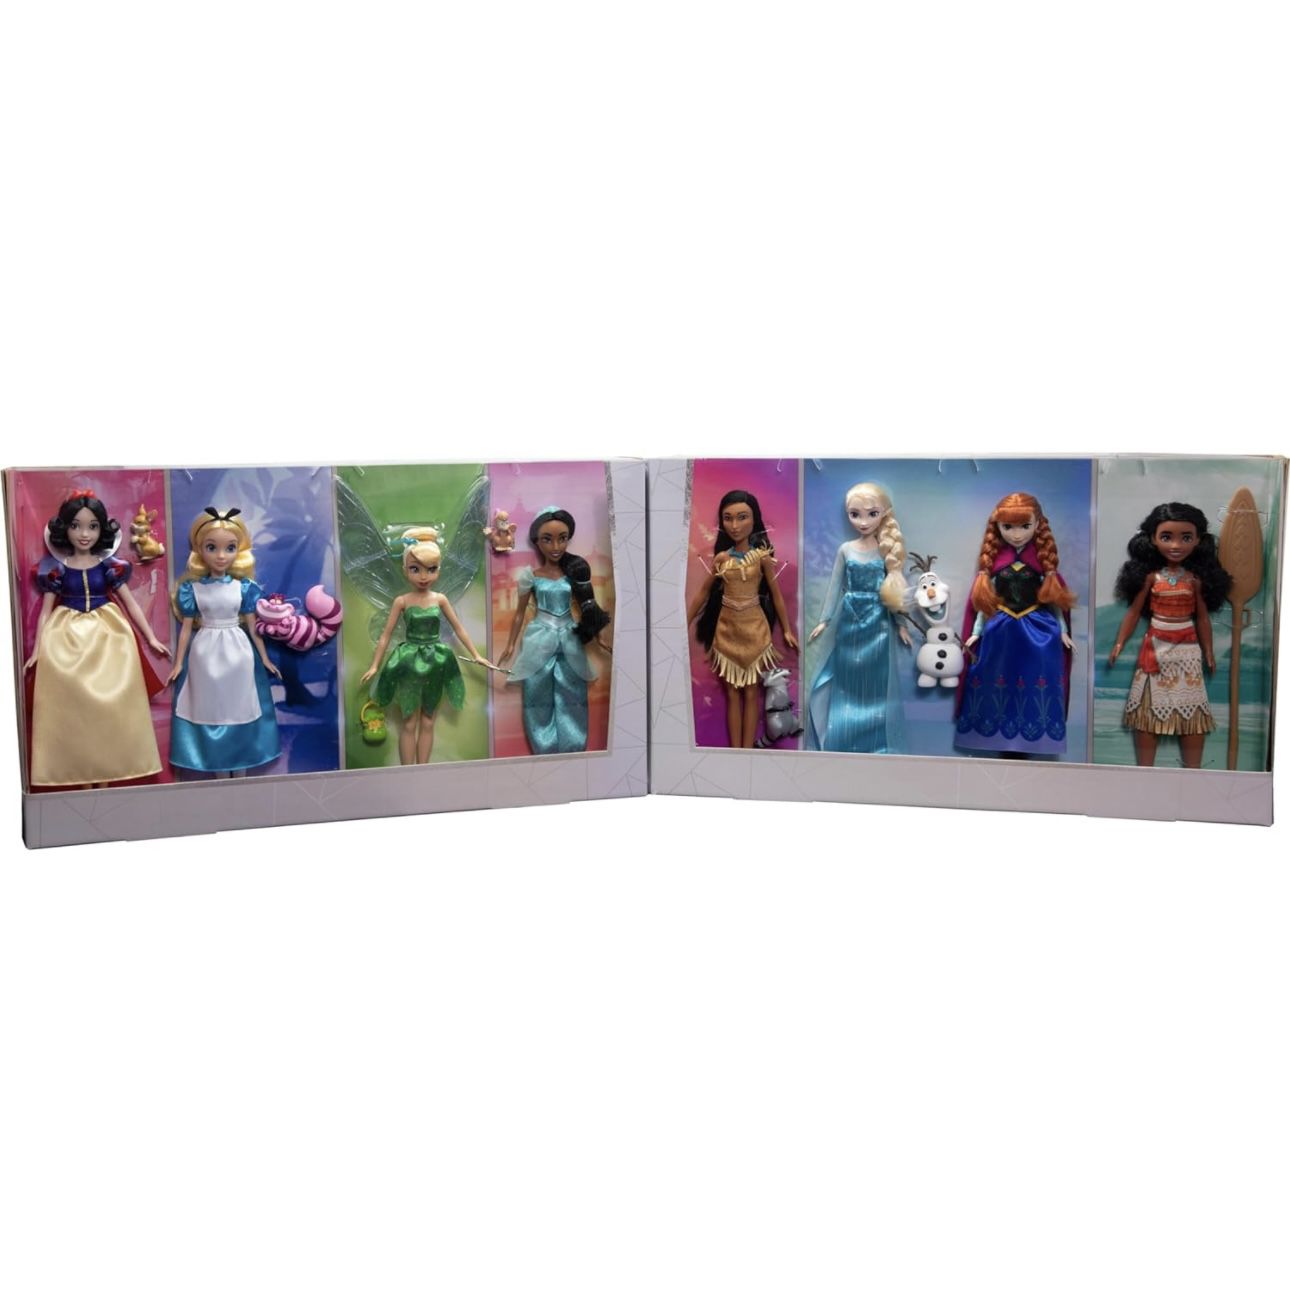 New Mattel Disney Princess Fashion Doll 8-Pack with Accessories to Celebrate Disney 100, Inspired by Disney Movies, Gifts for Kids and Collectors